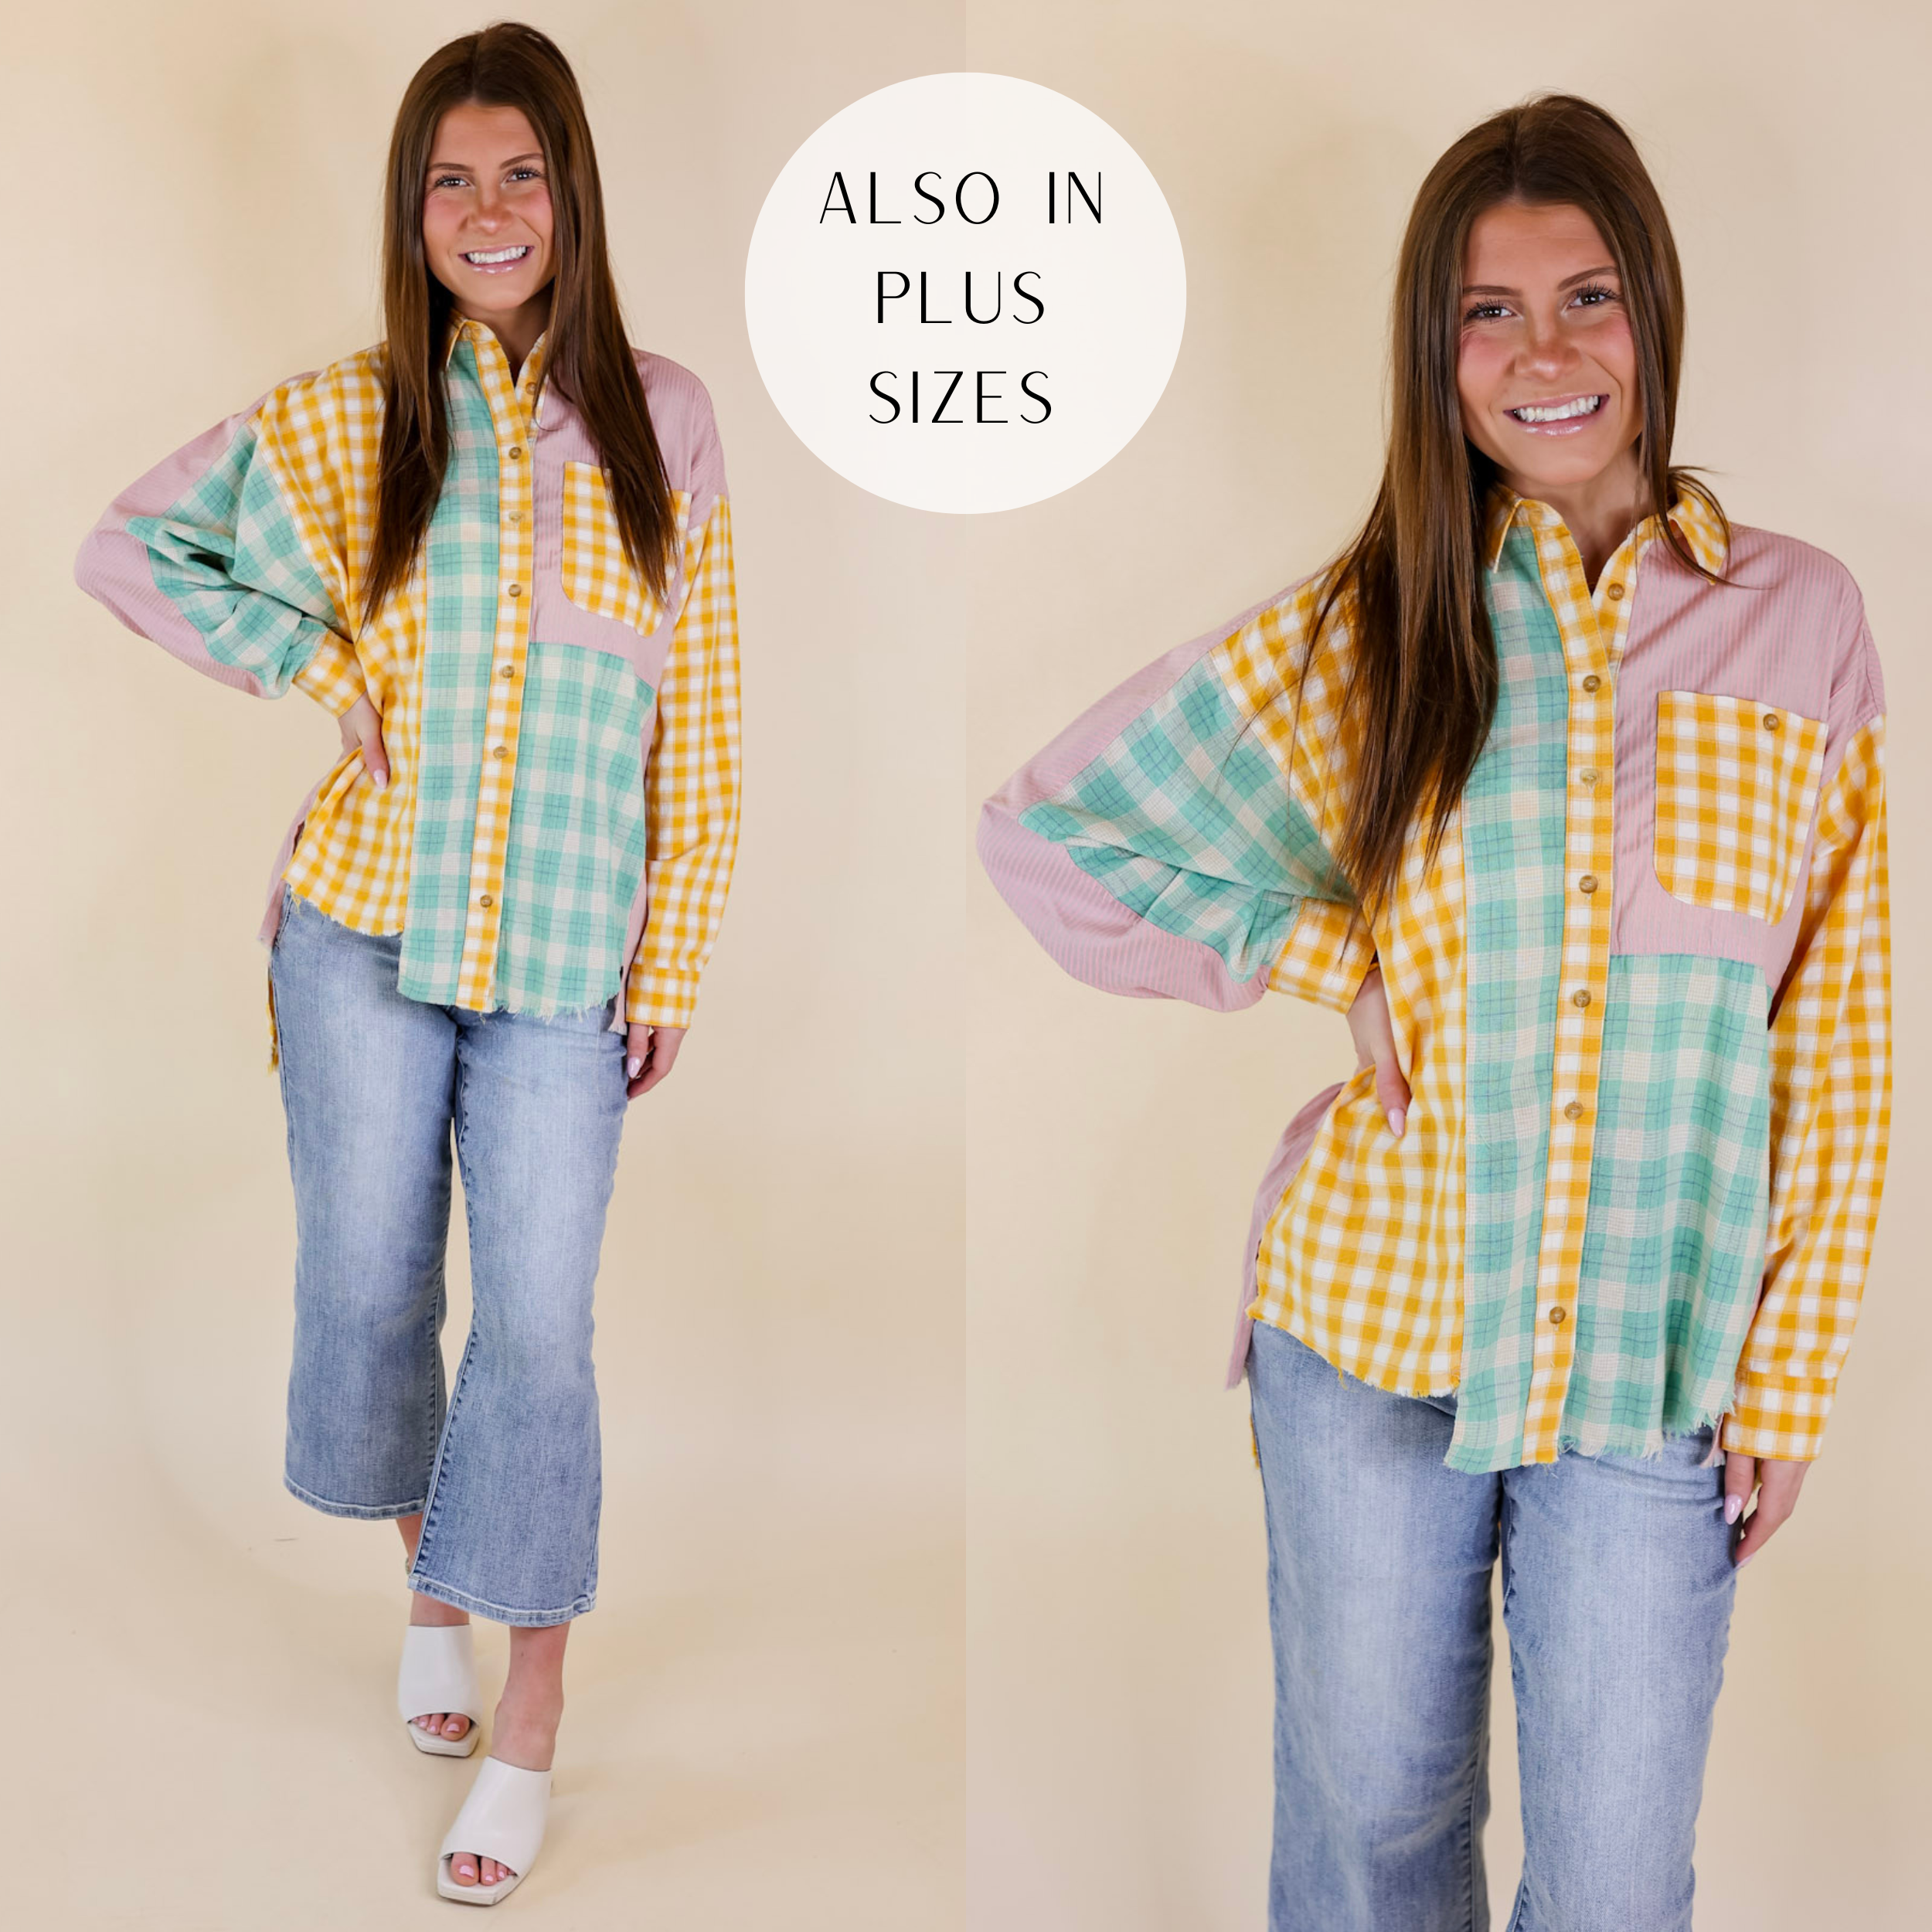 Model is wearing a button up plaid top that is a mix of green, yellow, and pink. Model has it paired with light wash jeans and ivory heels.